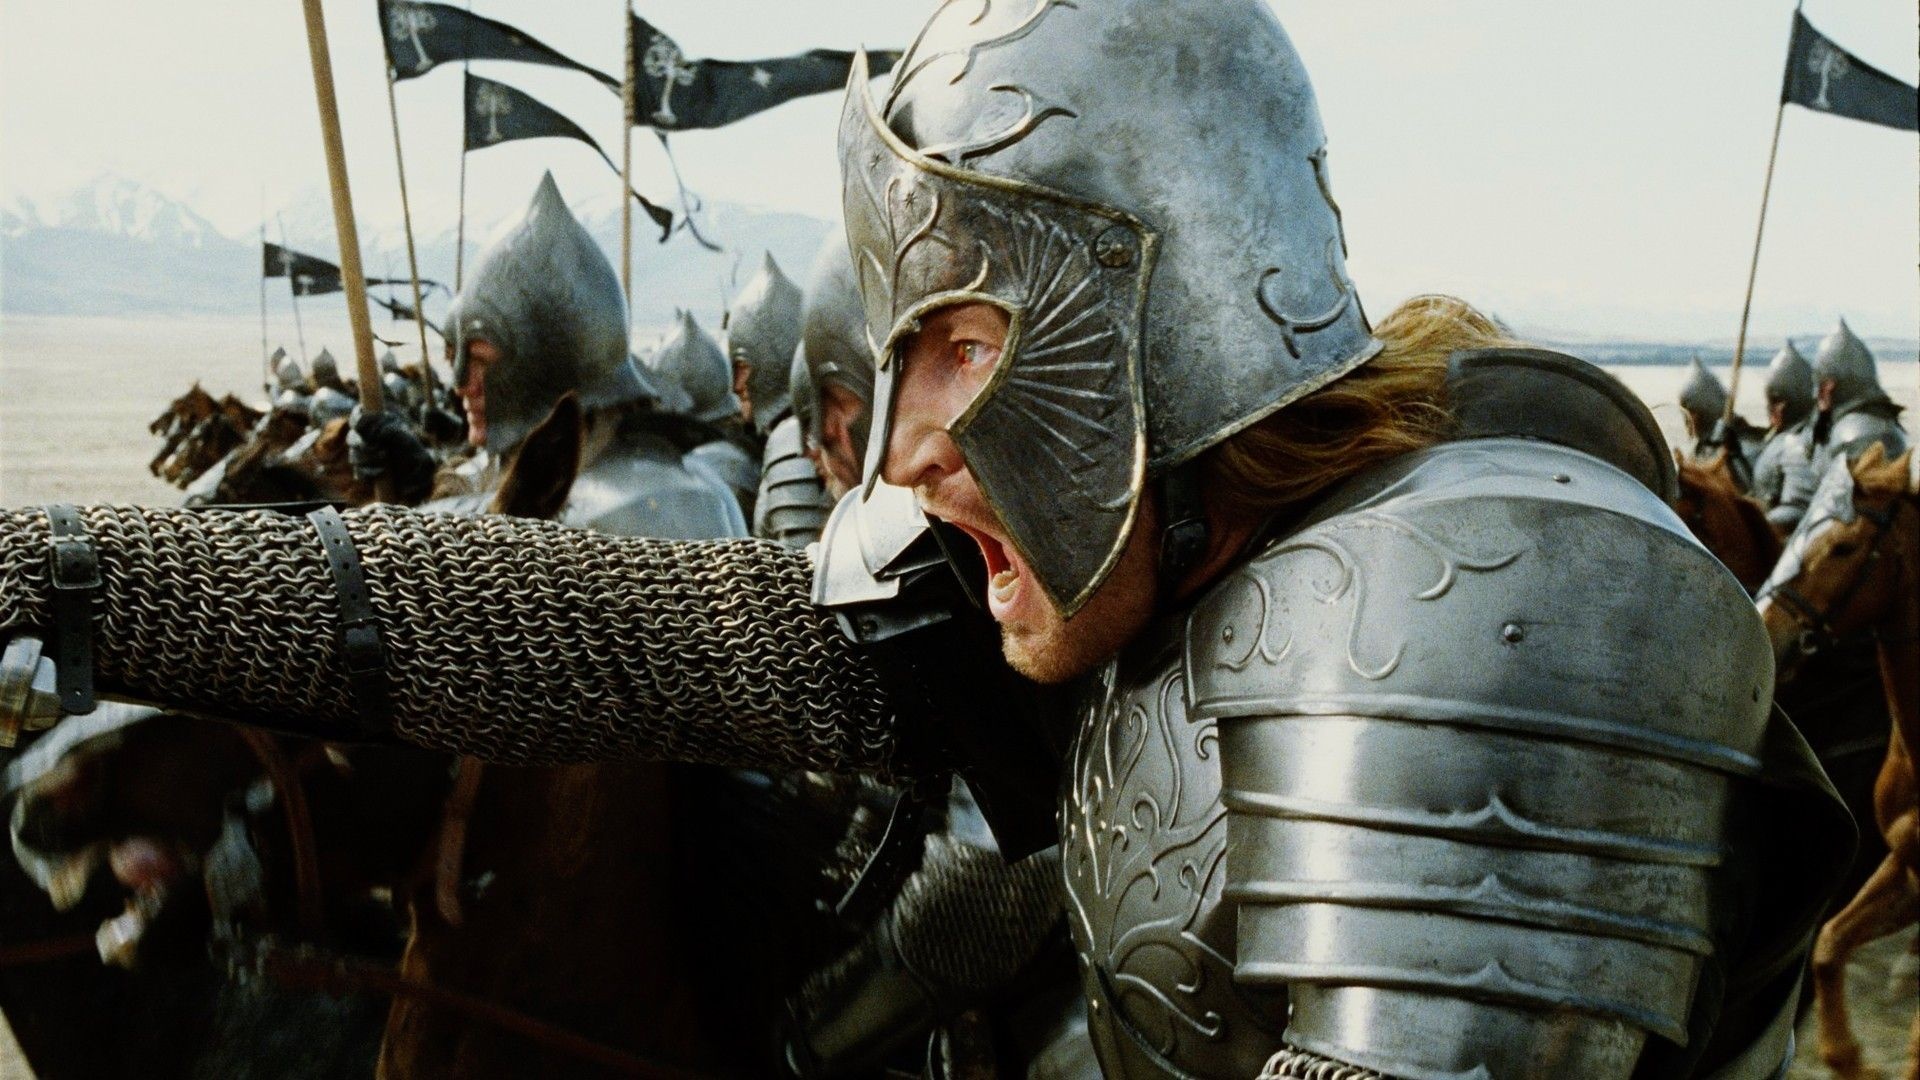 Gondor: The end of the Third Age, Captain Faramir and Knights of Minas Tirith, The last Ruling Steward. 1920x1080 Full HD Background.